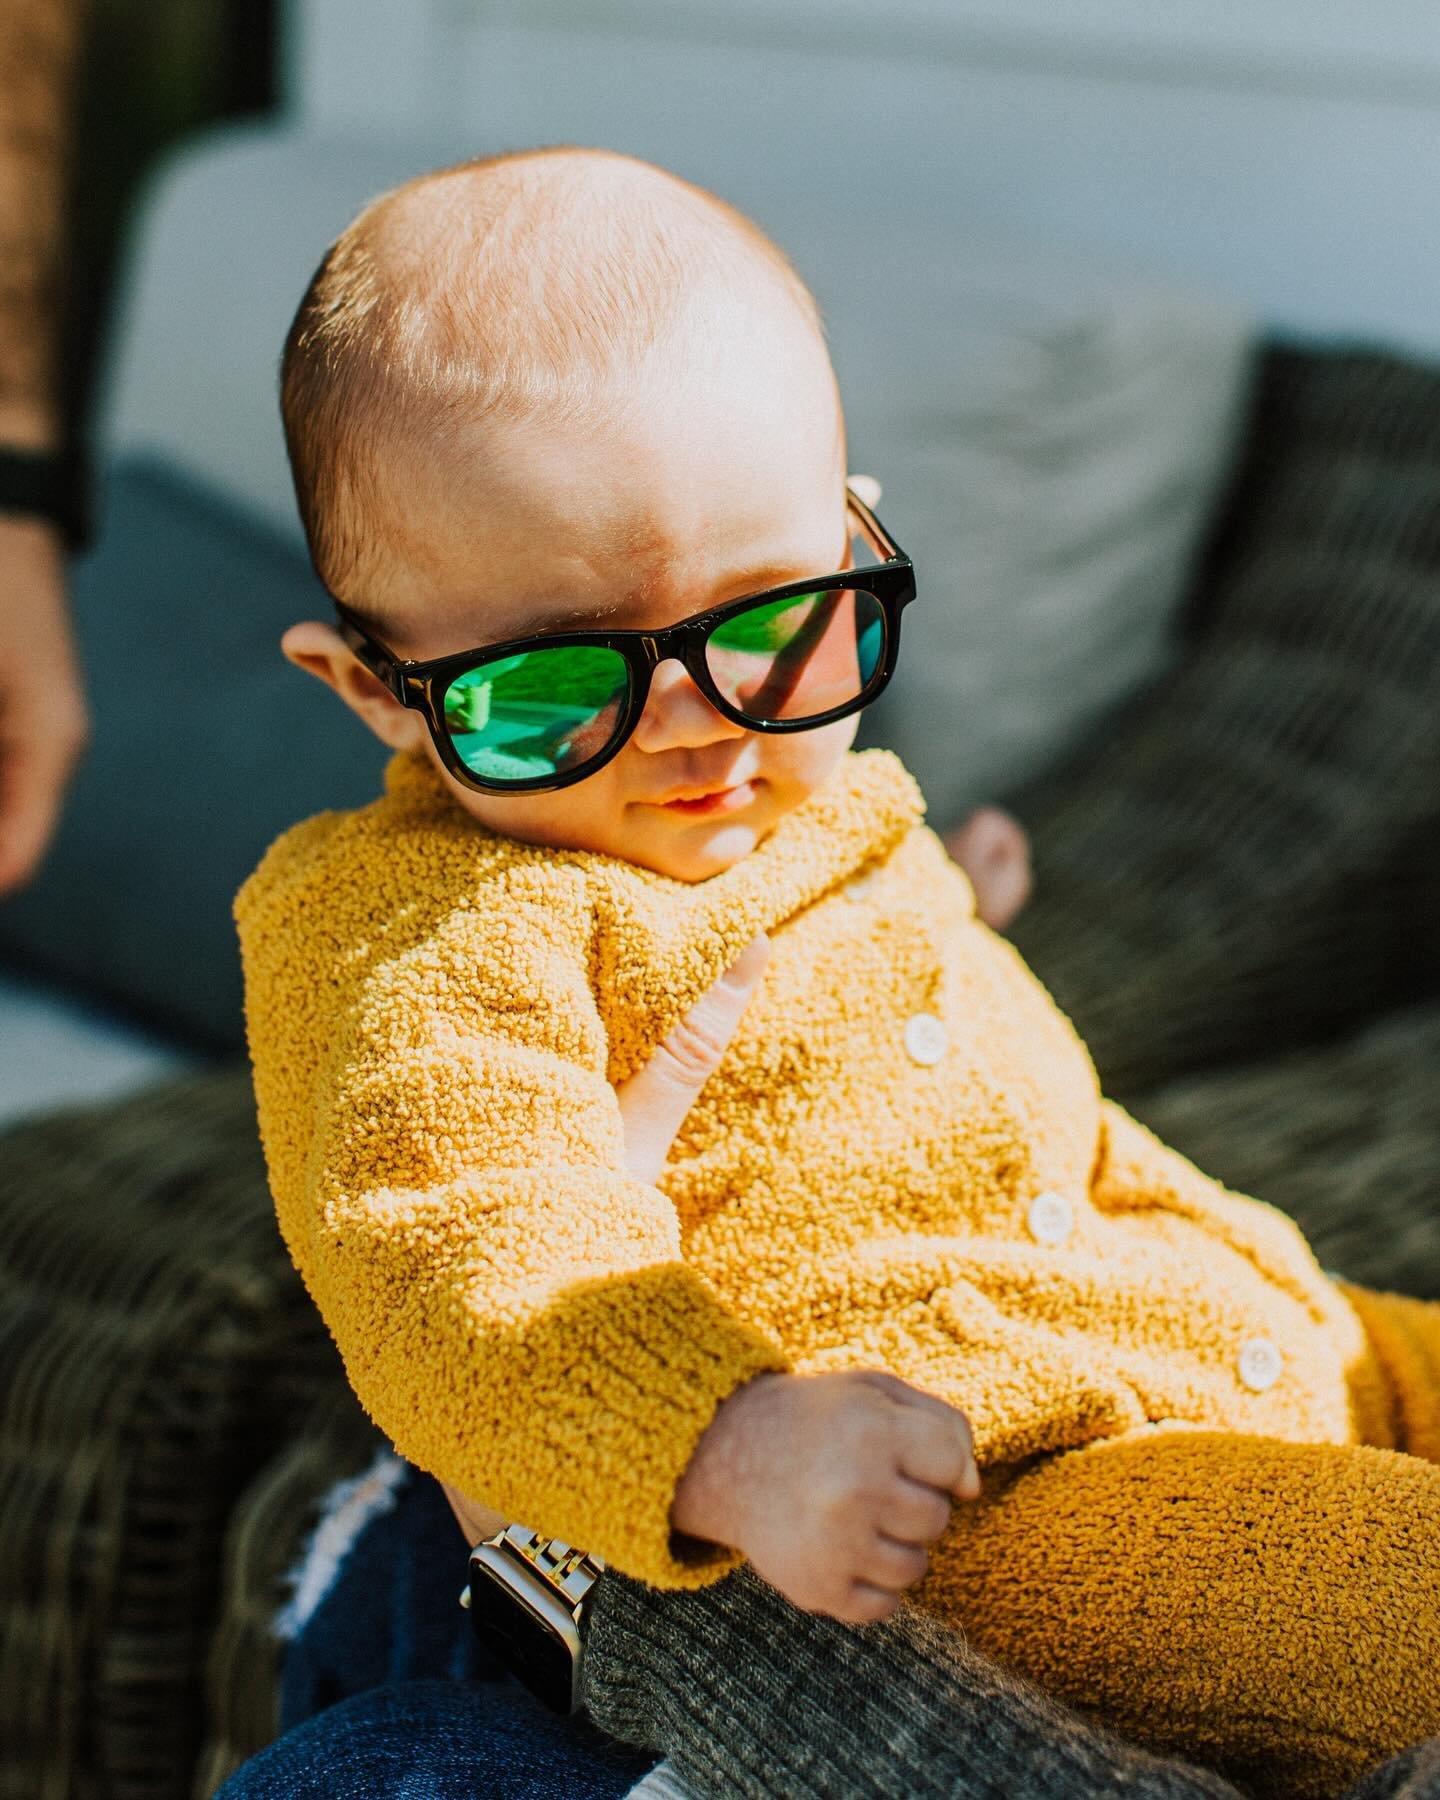 Sun&rsquo;s out, y&rsquo;all. ☀️🕶️ Gonna try to be half as cool as this wee babe this spring. ☺️
.
.
.
.
#sunsout #spring #springfamilysession #familyphotography #chicagofamilyphotographer #sunglasses #cute #4months #homesession #family #chicagofami